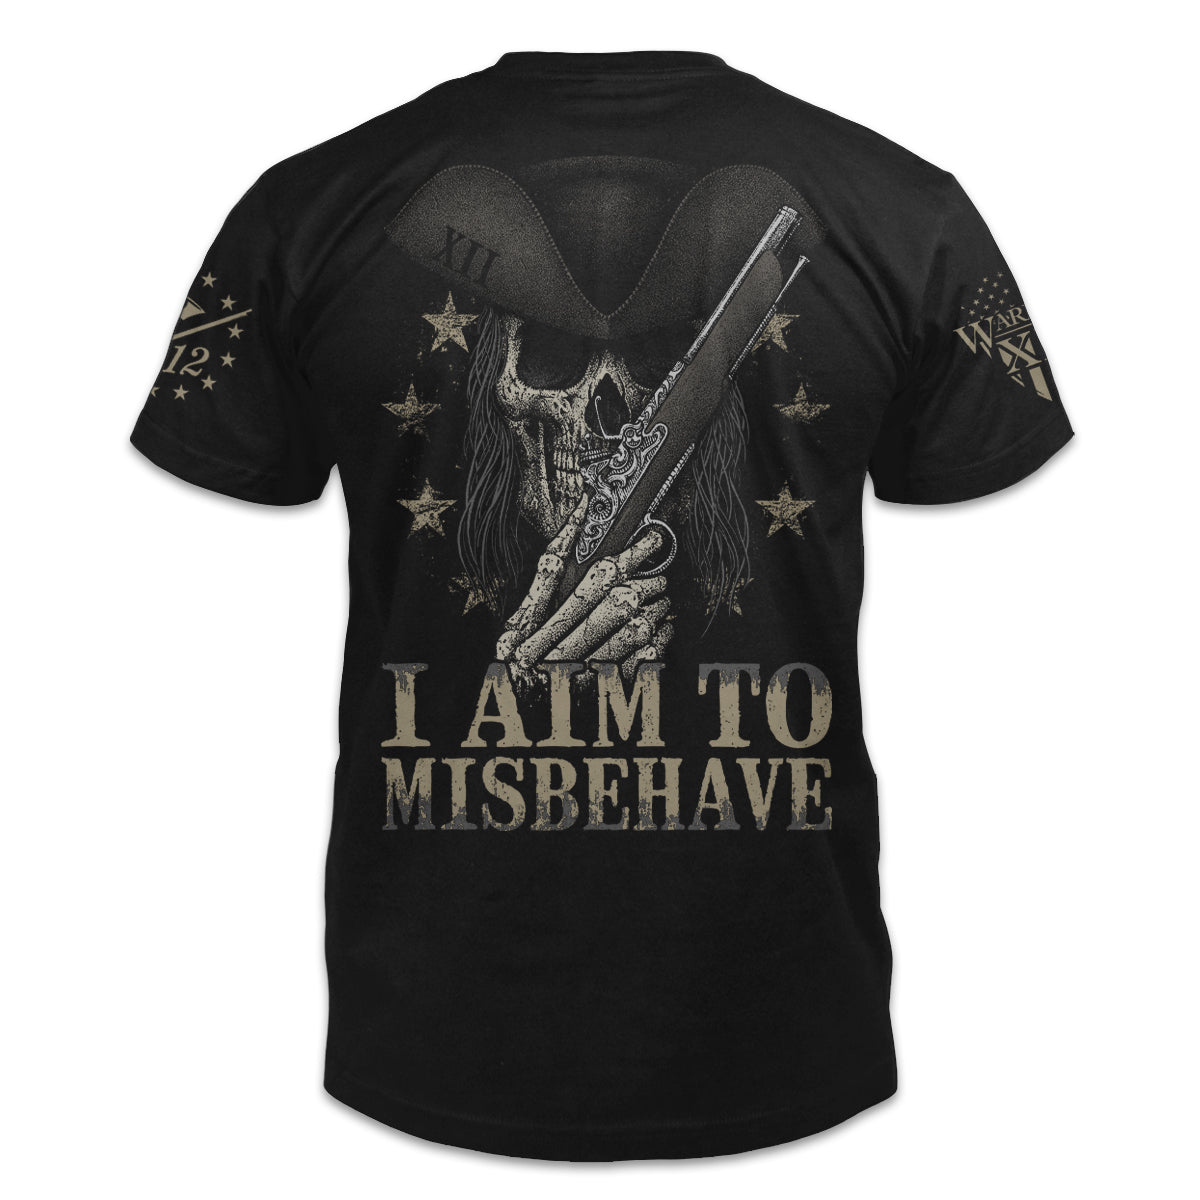 A black t-shirt with the words "I aim to misbehave" with a skeleton wearing a hat holding a gun printed on the back of the shirt.